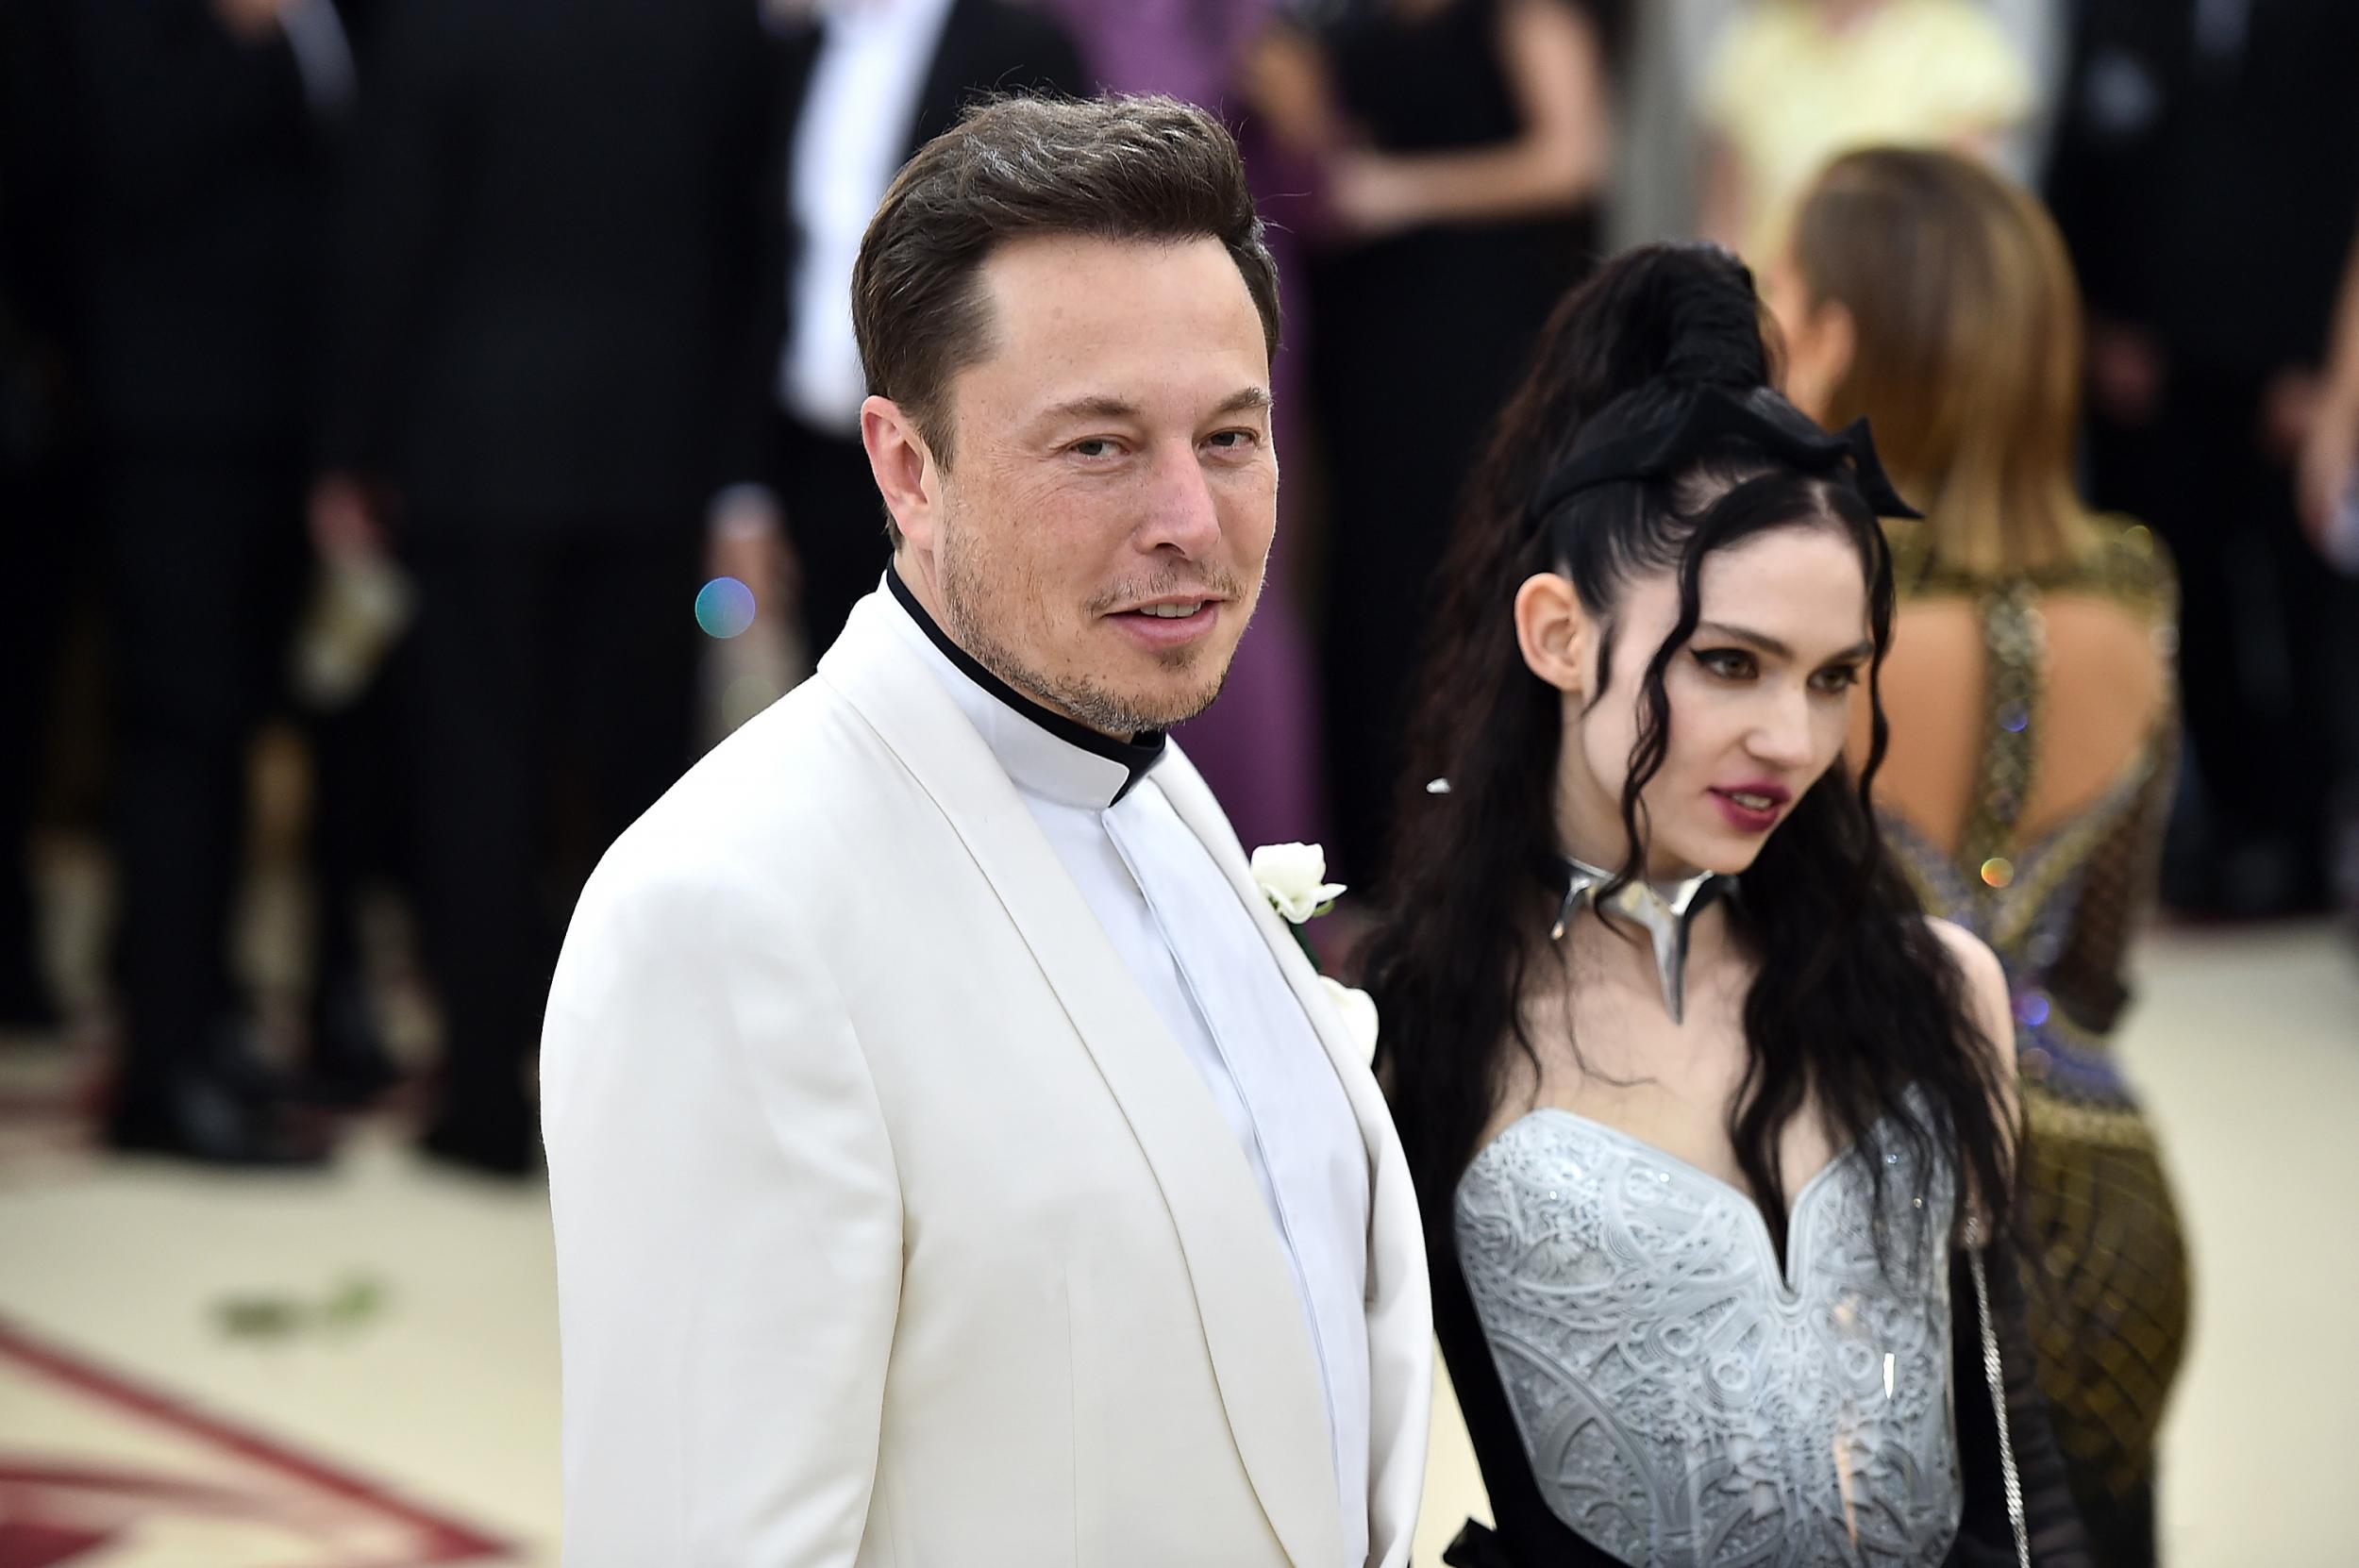 Elon Musk has been the target of cryptocurrency scammers on Twitter, who have sought to capitalize from his cult-like status